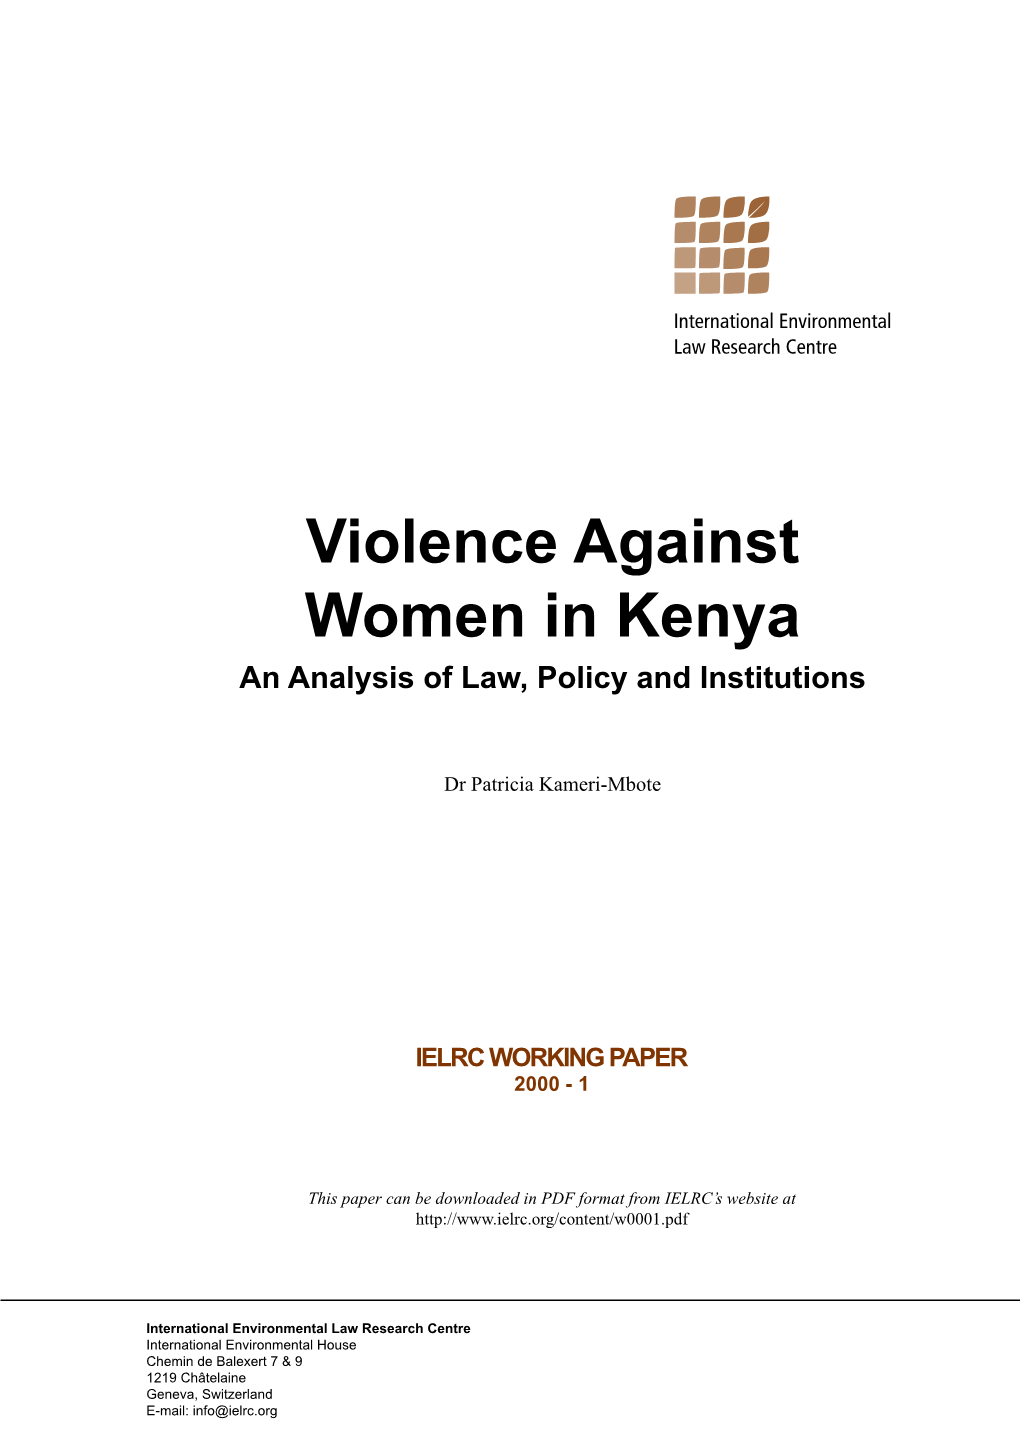 Violence Against Women in Kenya an Analysis of Law, Policy and Institutions